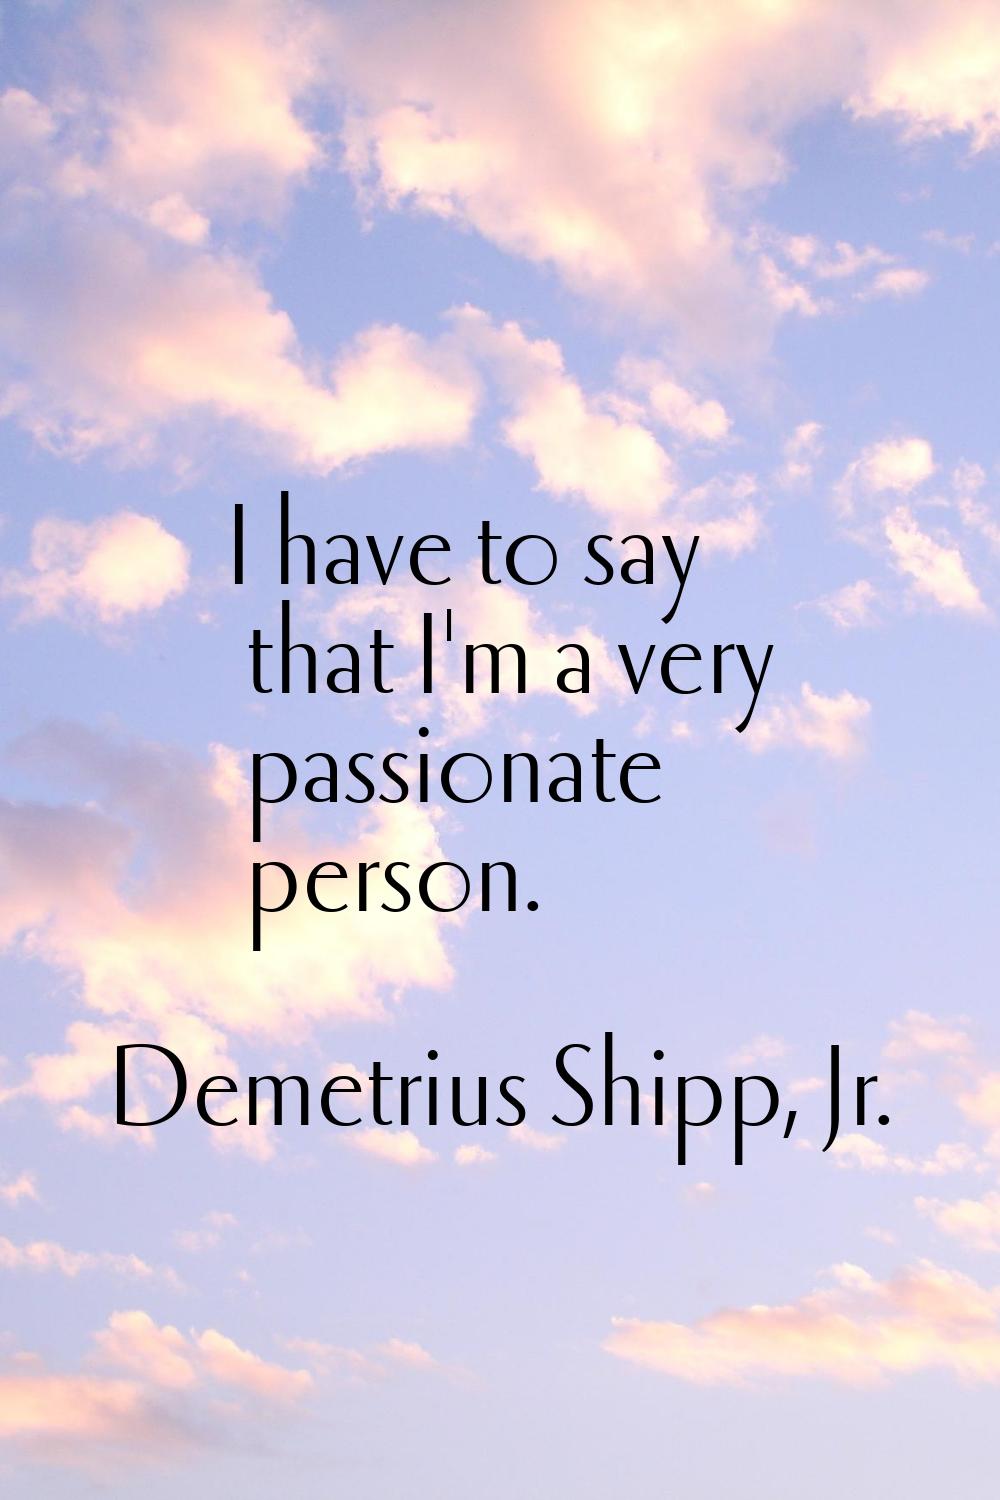 I have to say that I'm a very passionate person.